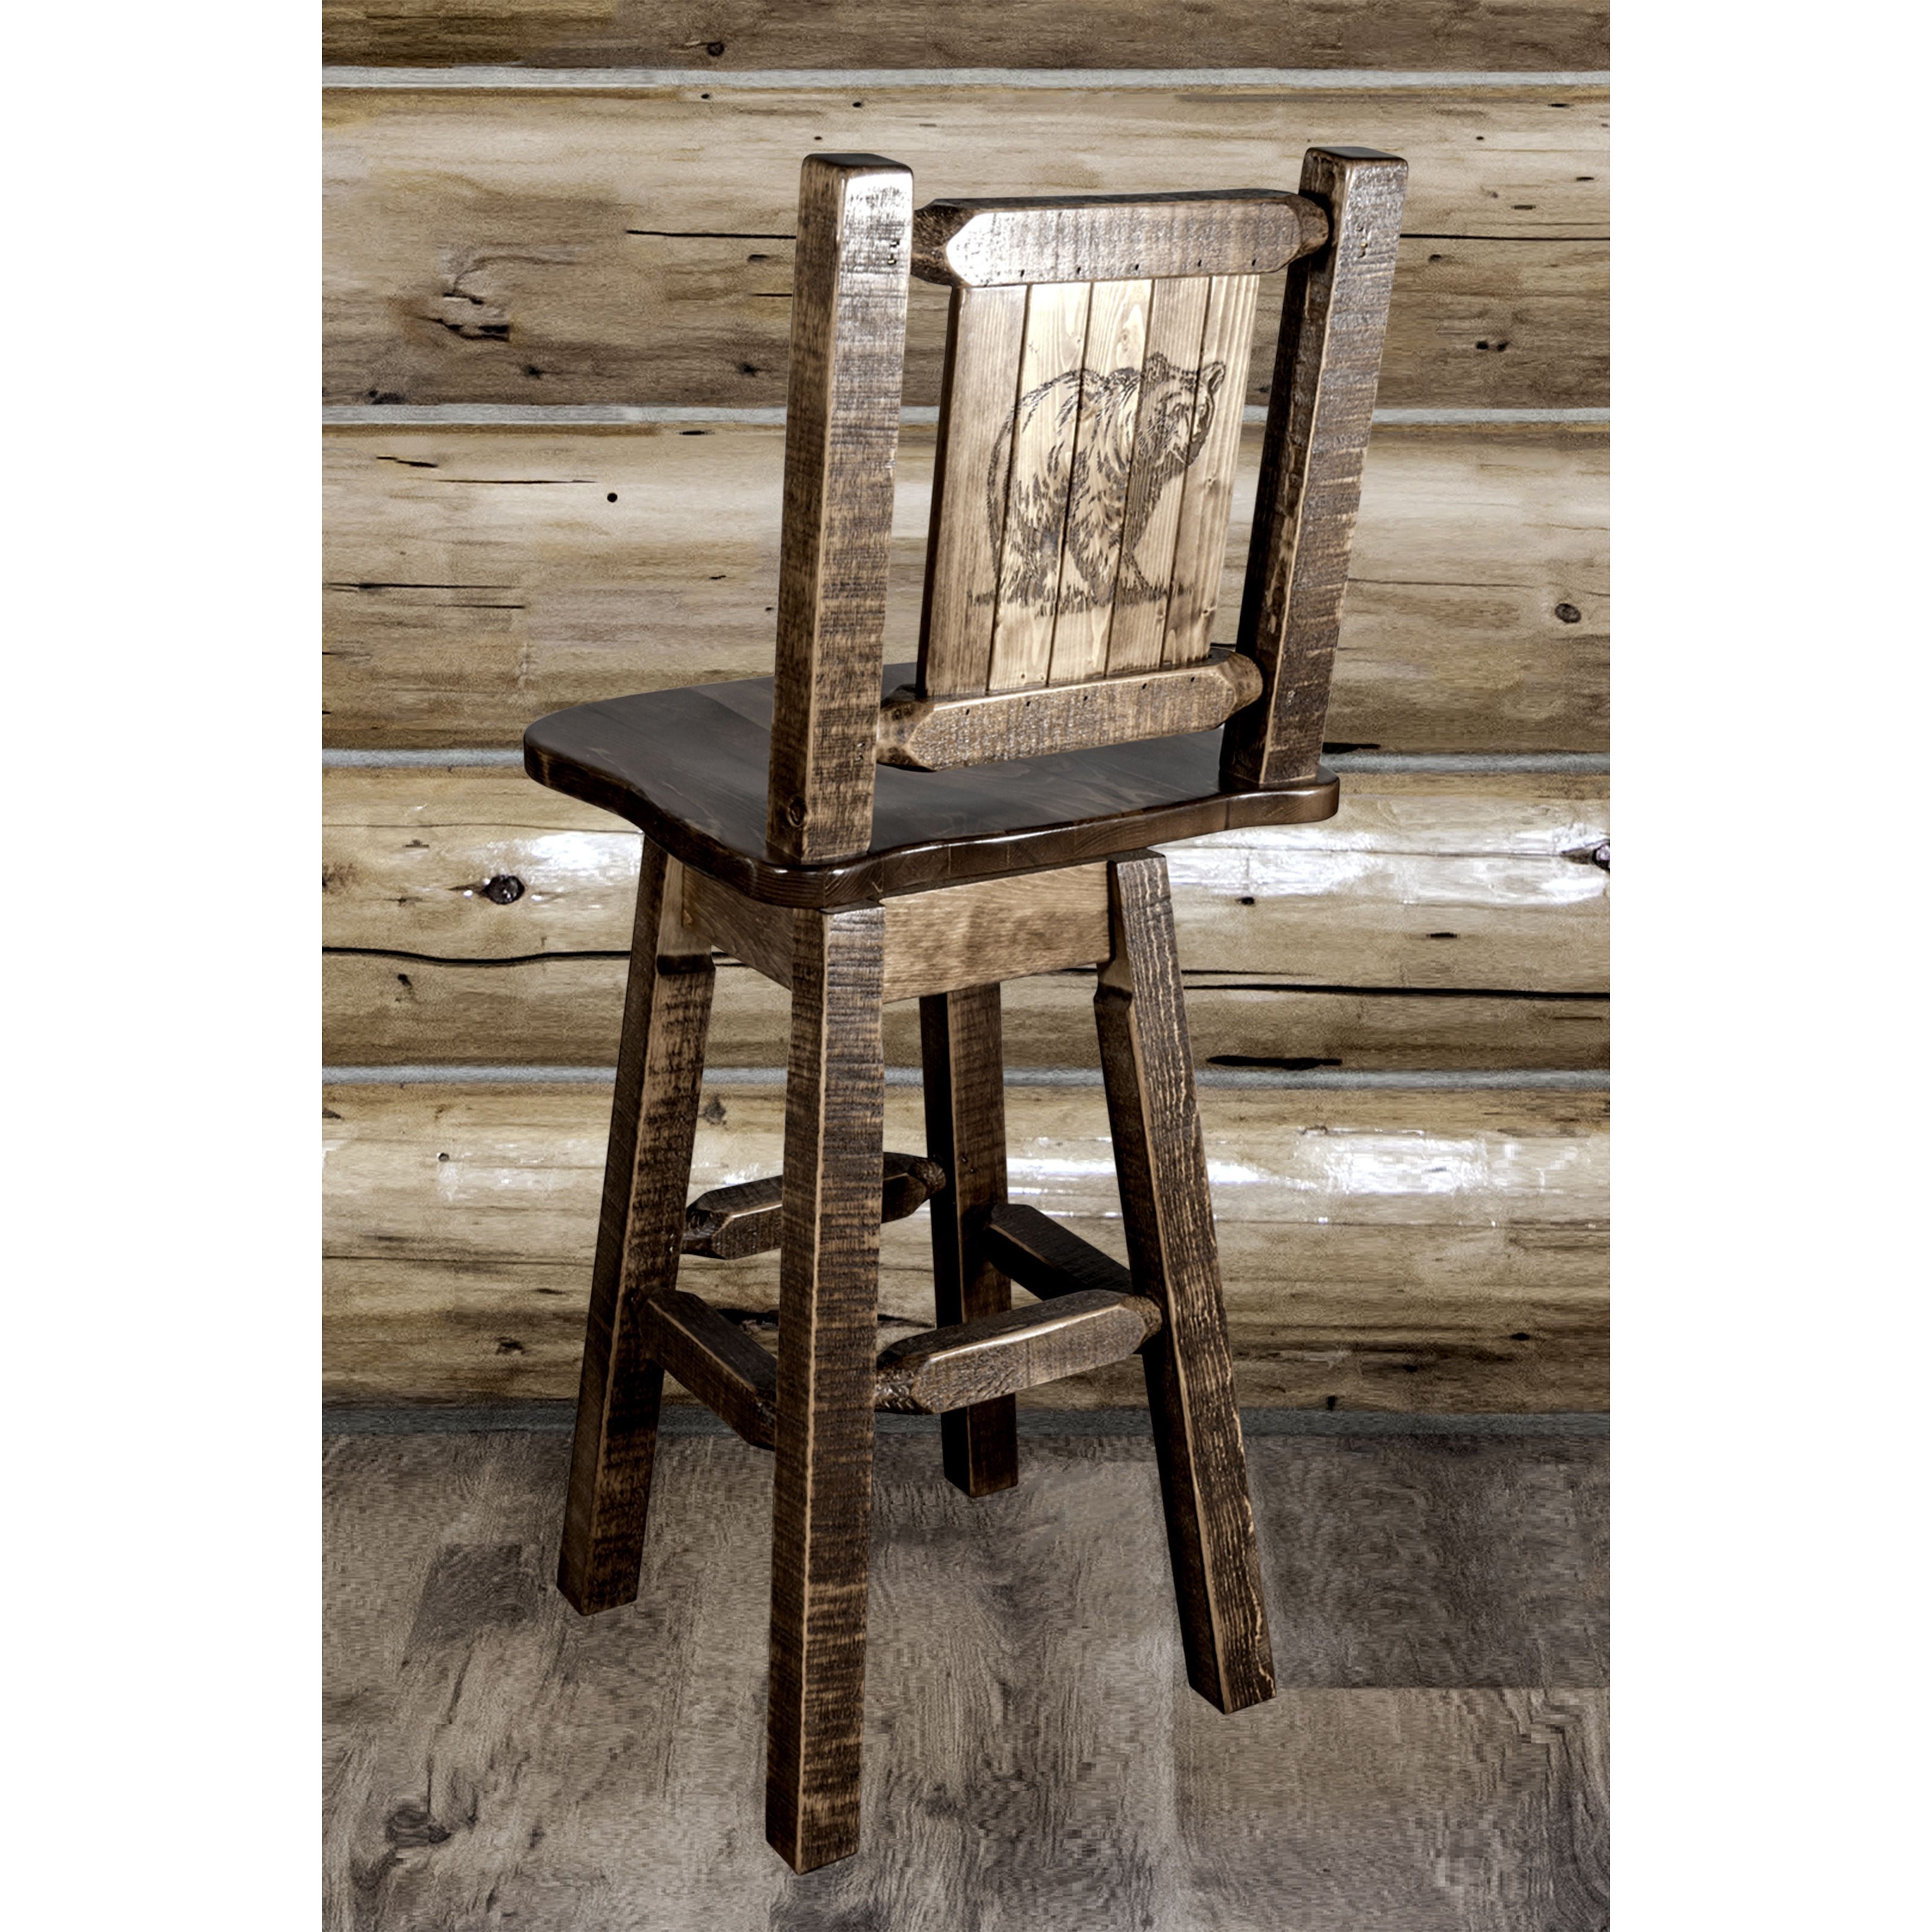 montana woodworks homestead collection-barstool with back swivel and laser engraved bear design stain lacquer finish mwhcbswsnrsllzbear indoor